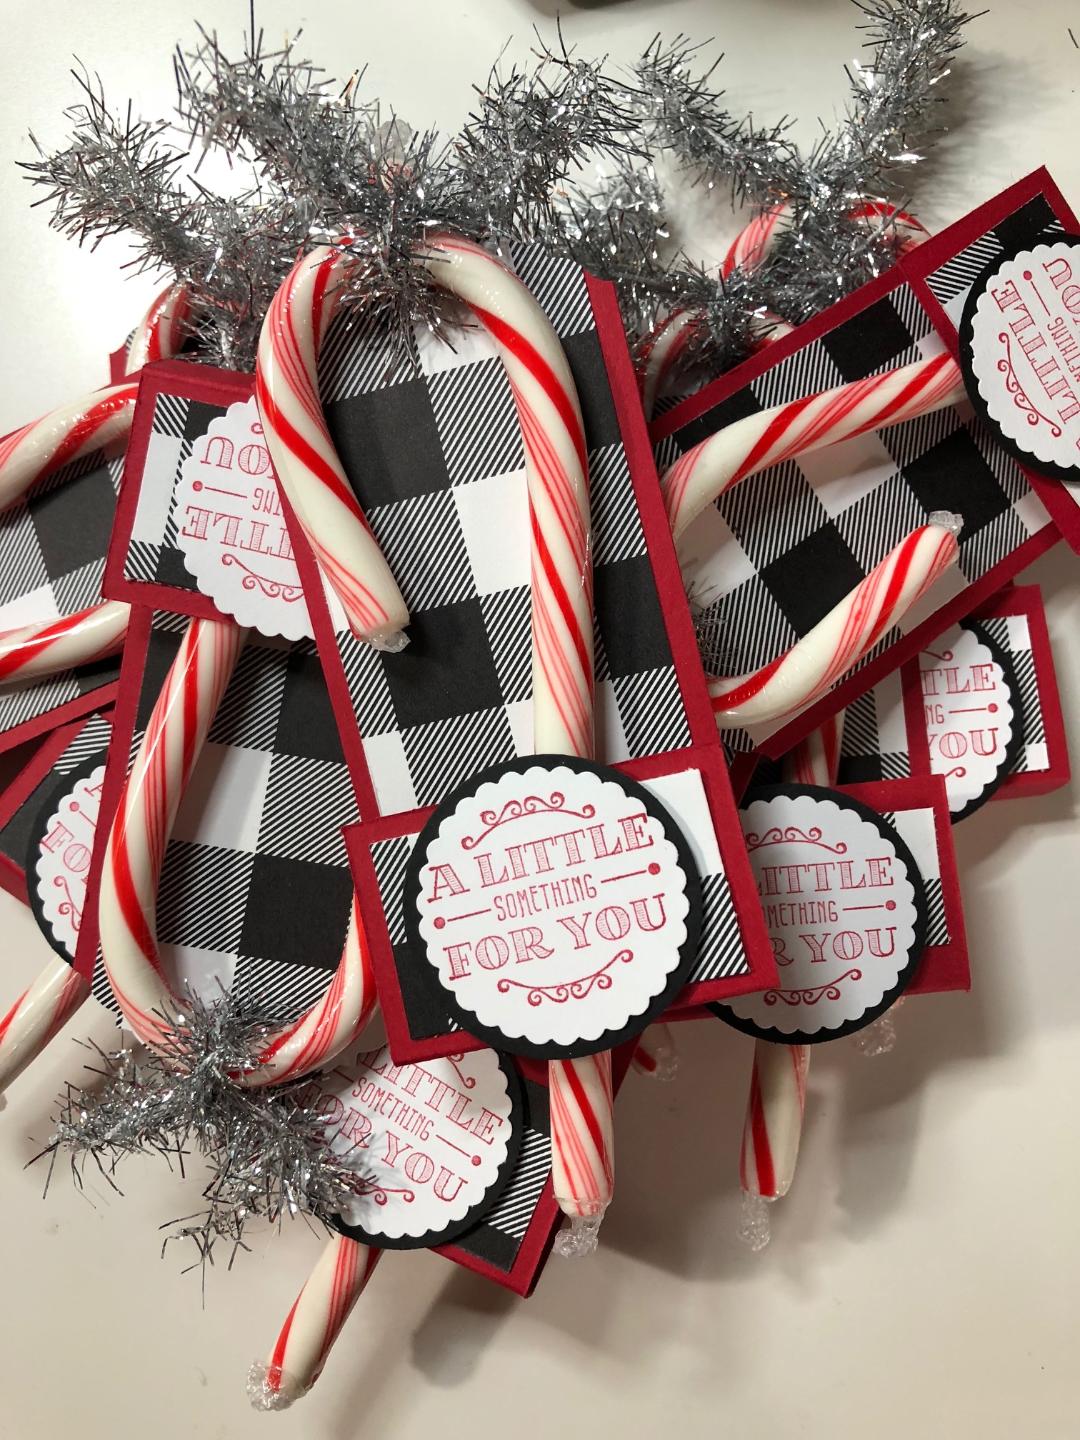 STAMPINSHOUT Candy Cane Holders FB LIVE 11.7.18